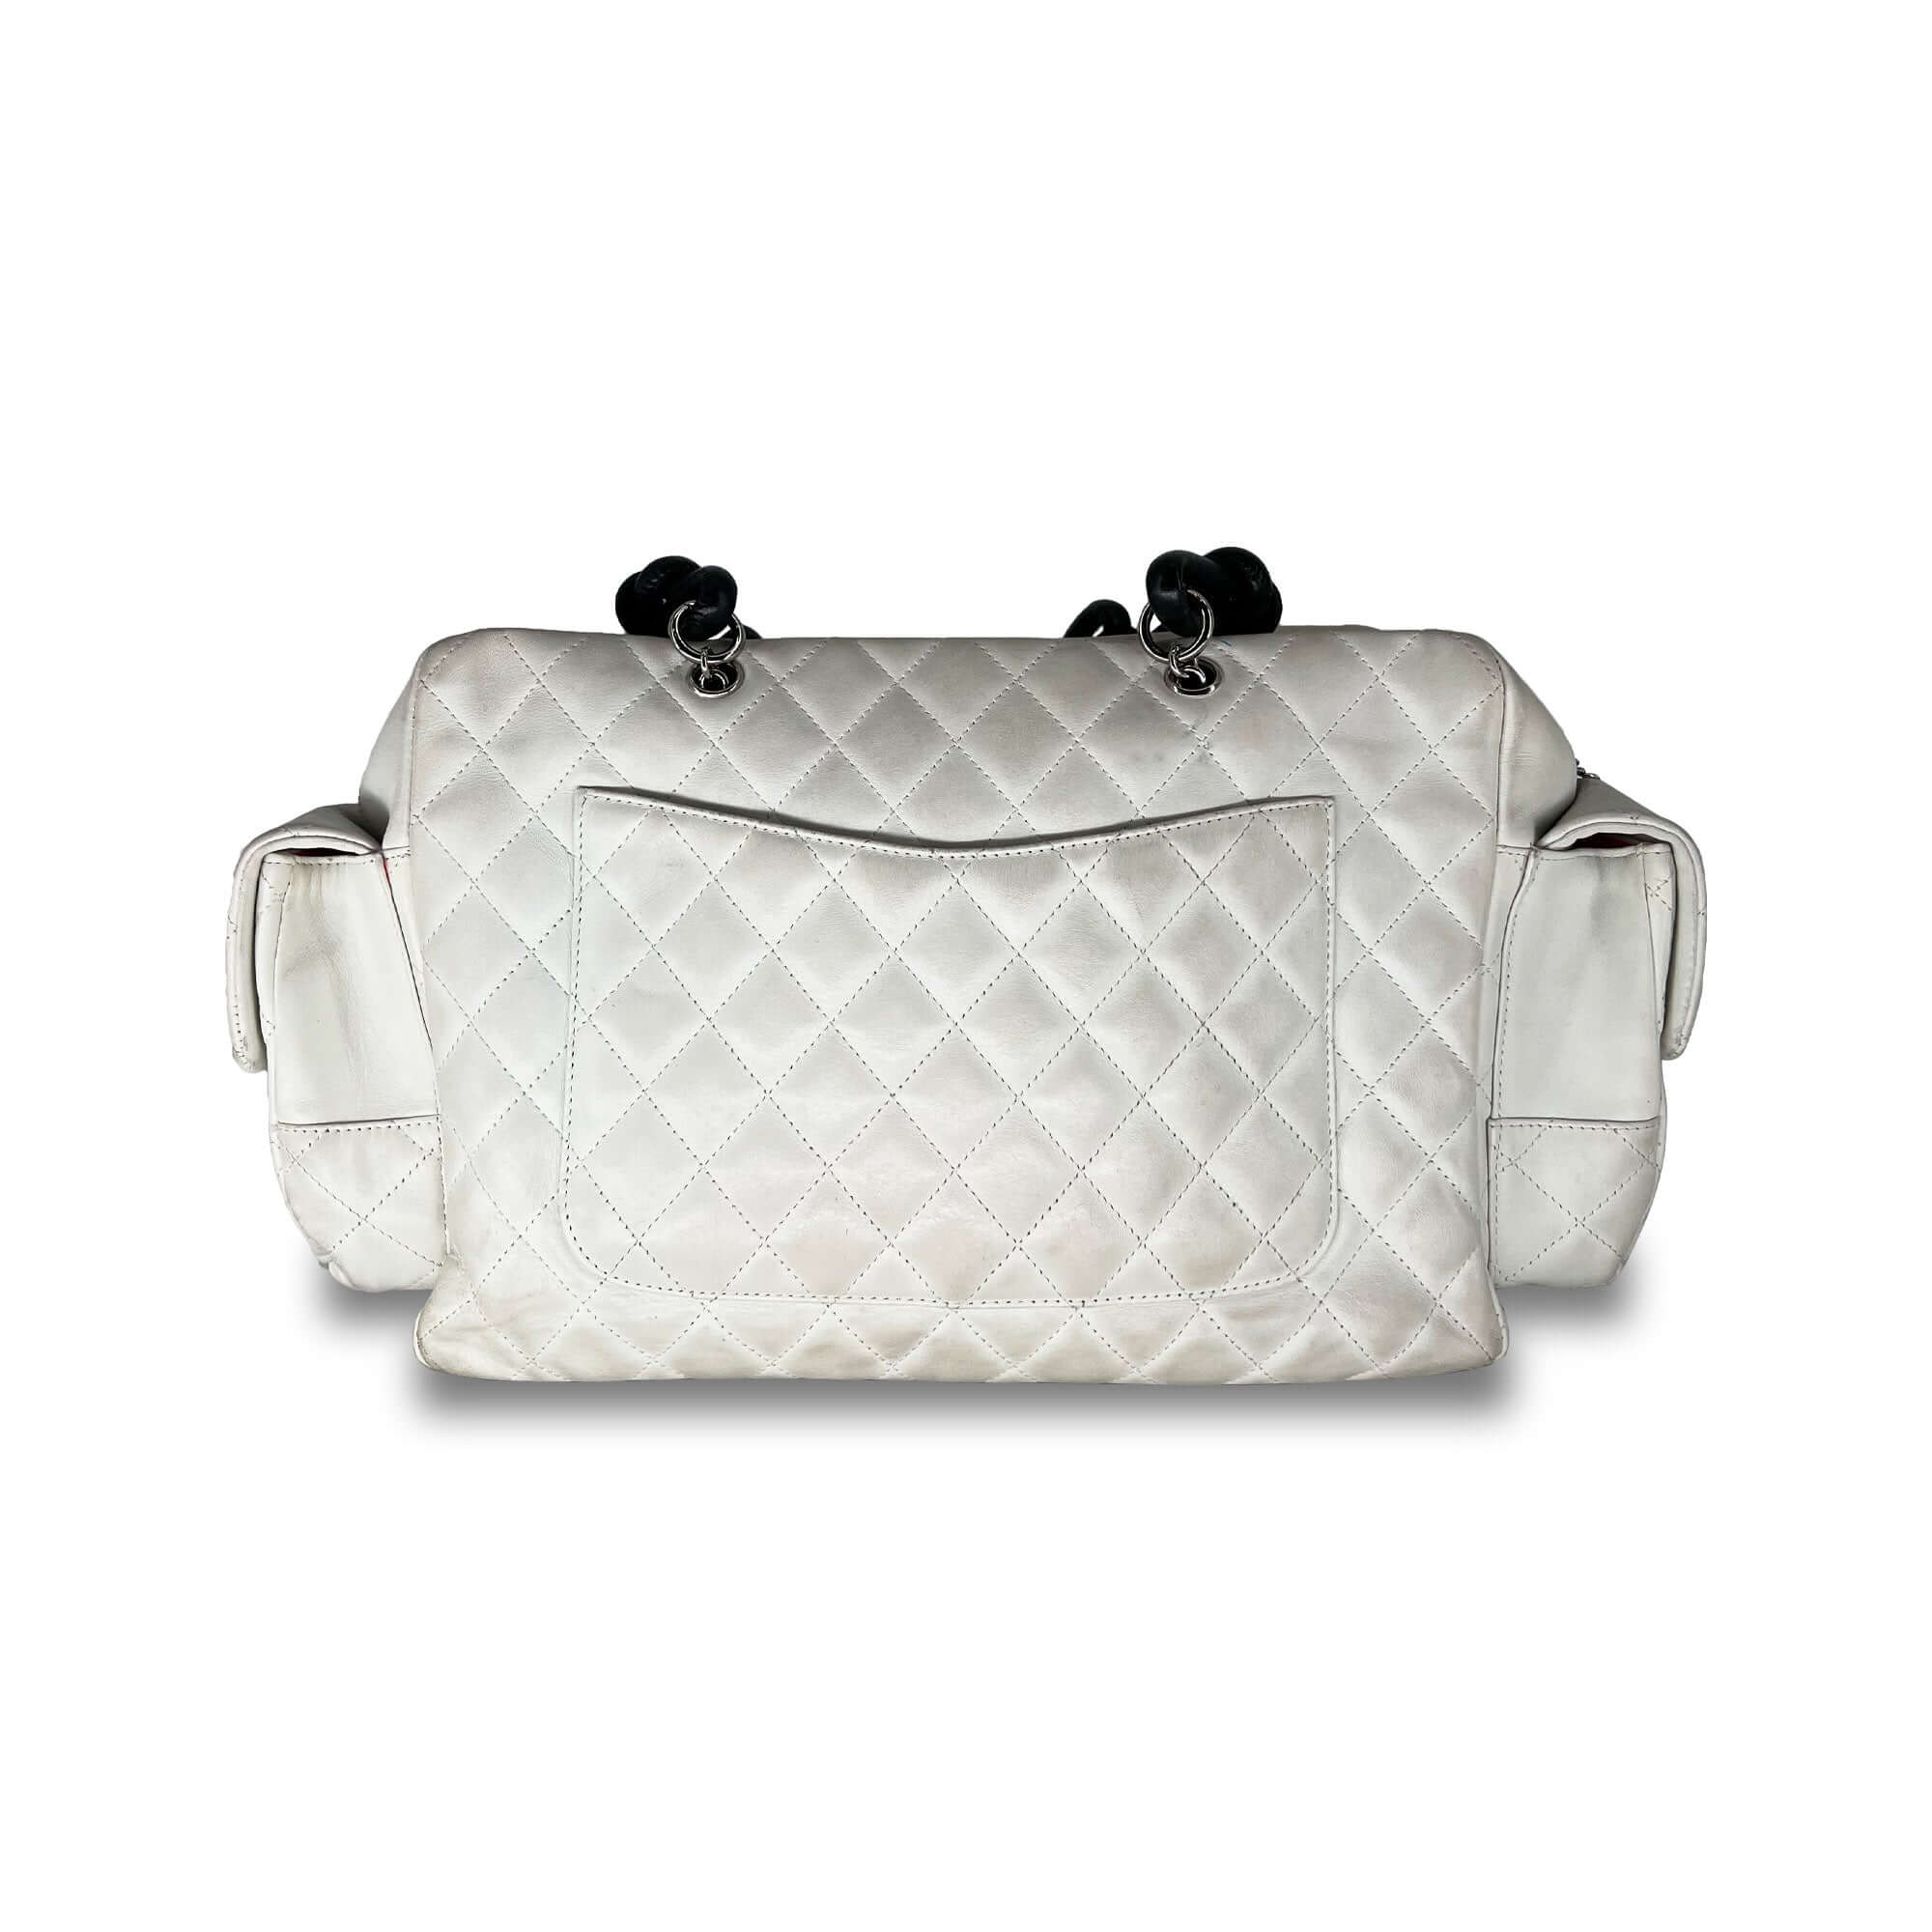 Chanel quilted calfskin leather reporter cambon bag